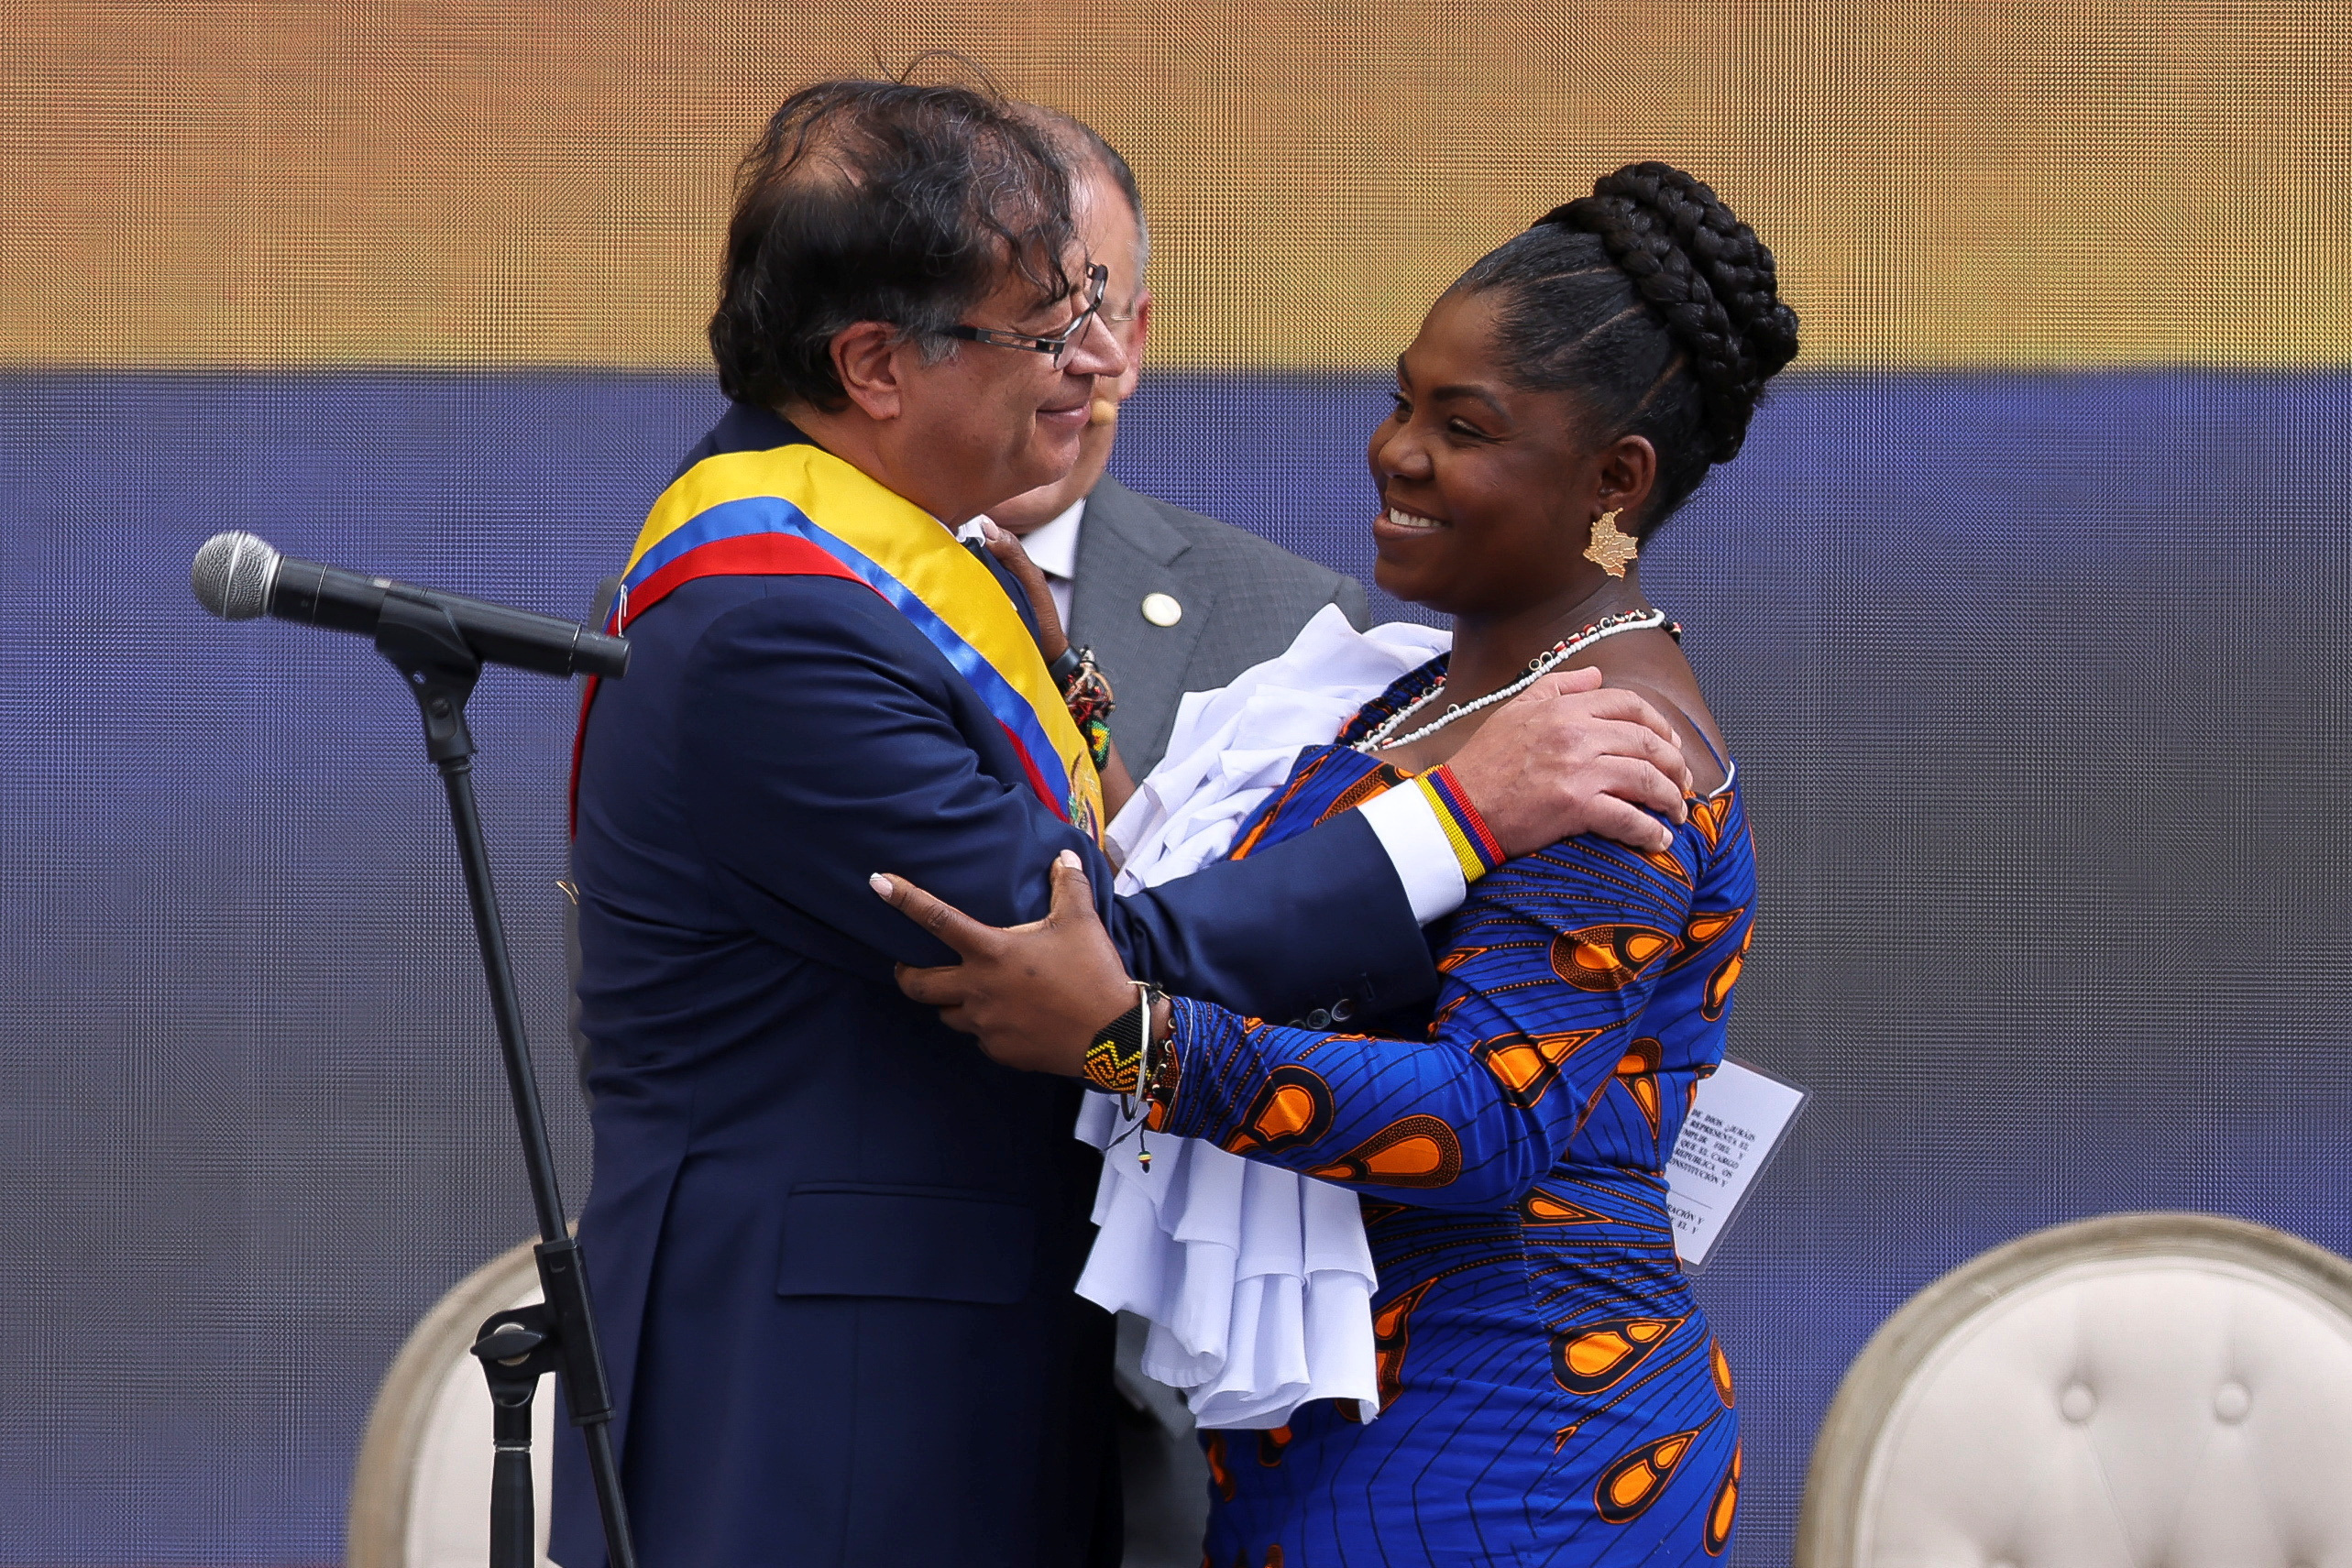 Colombia's President-elect Gustavo Petro takes office